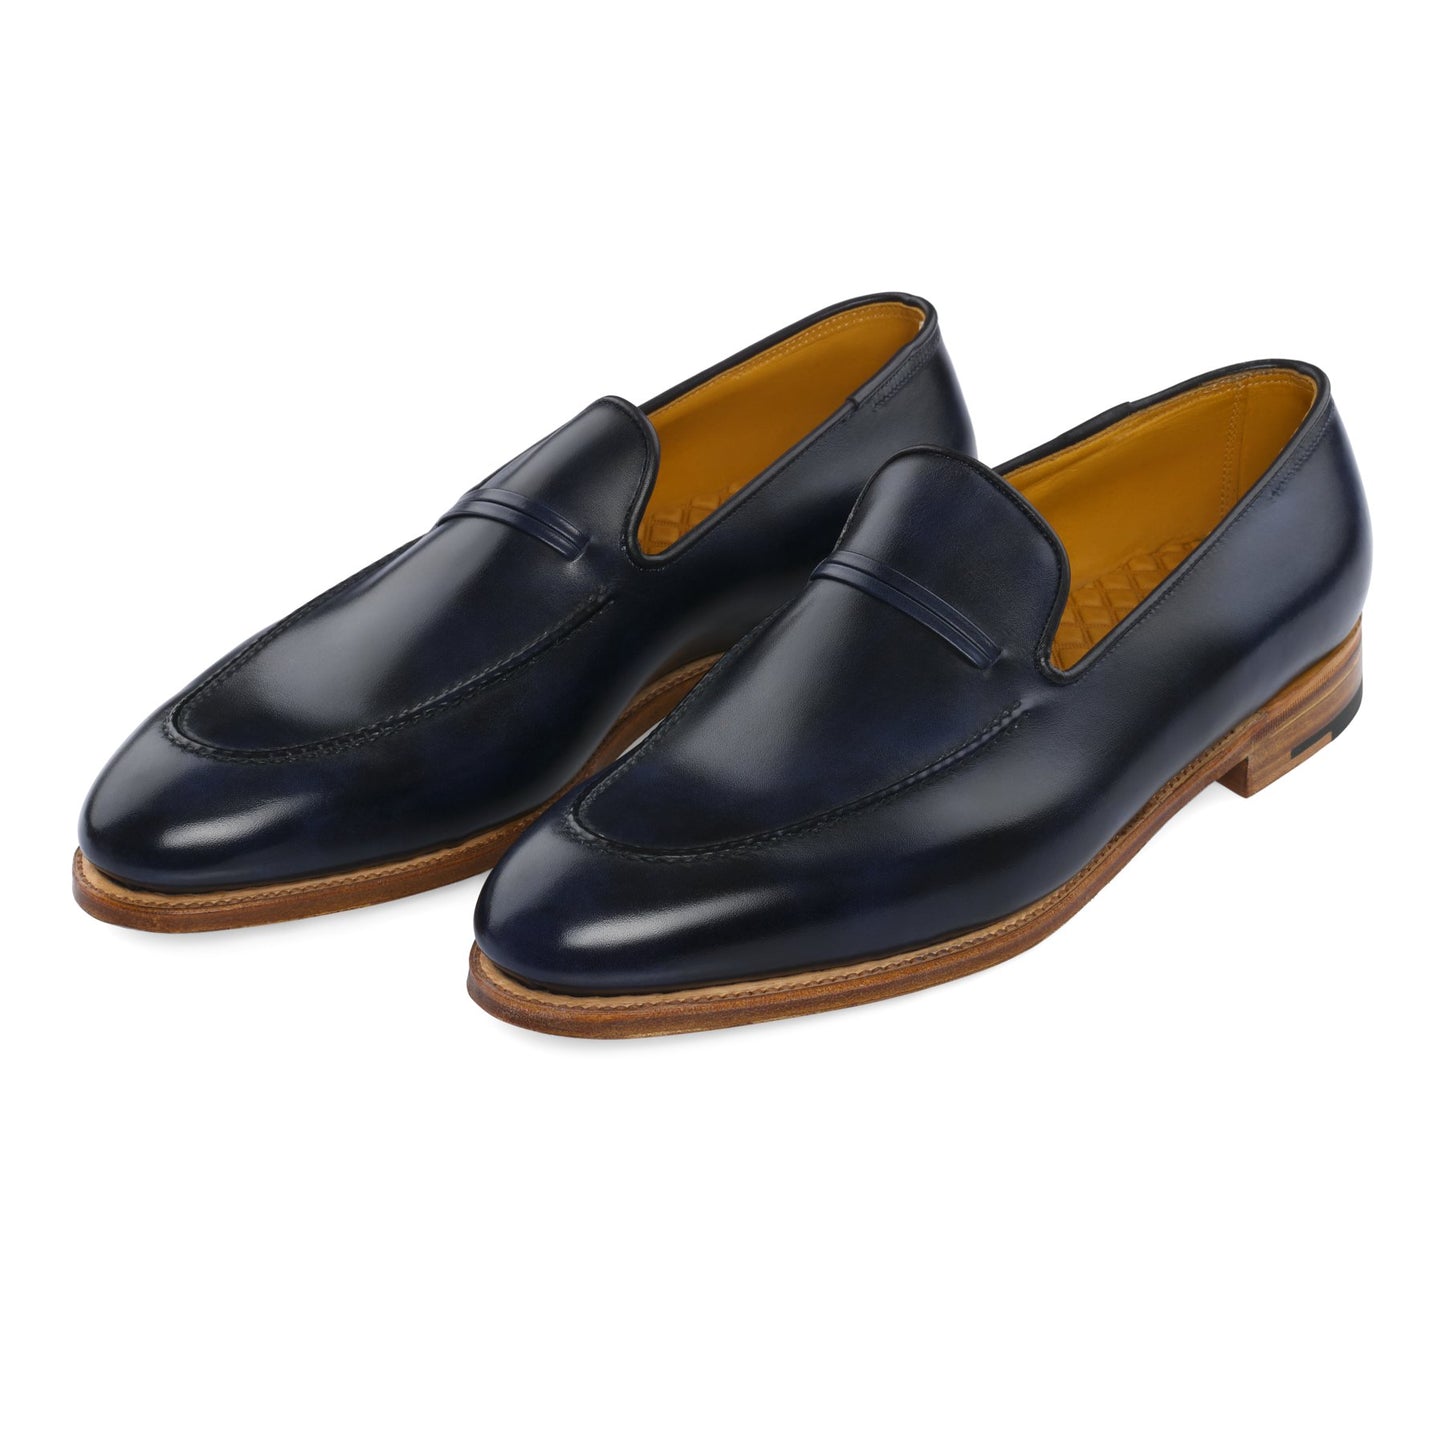 John Lobb "Amble" Classic Leather Loafer with Hand-Stitched Apron in Blue - SARTALE